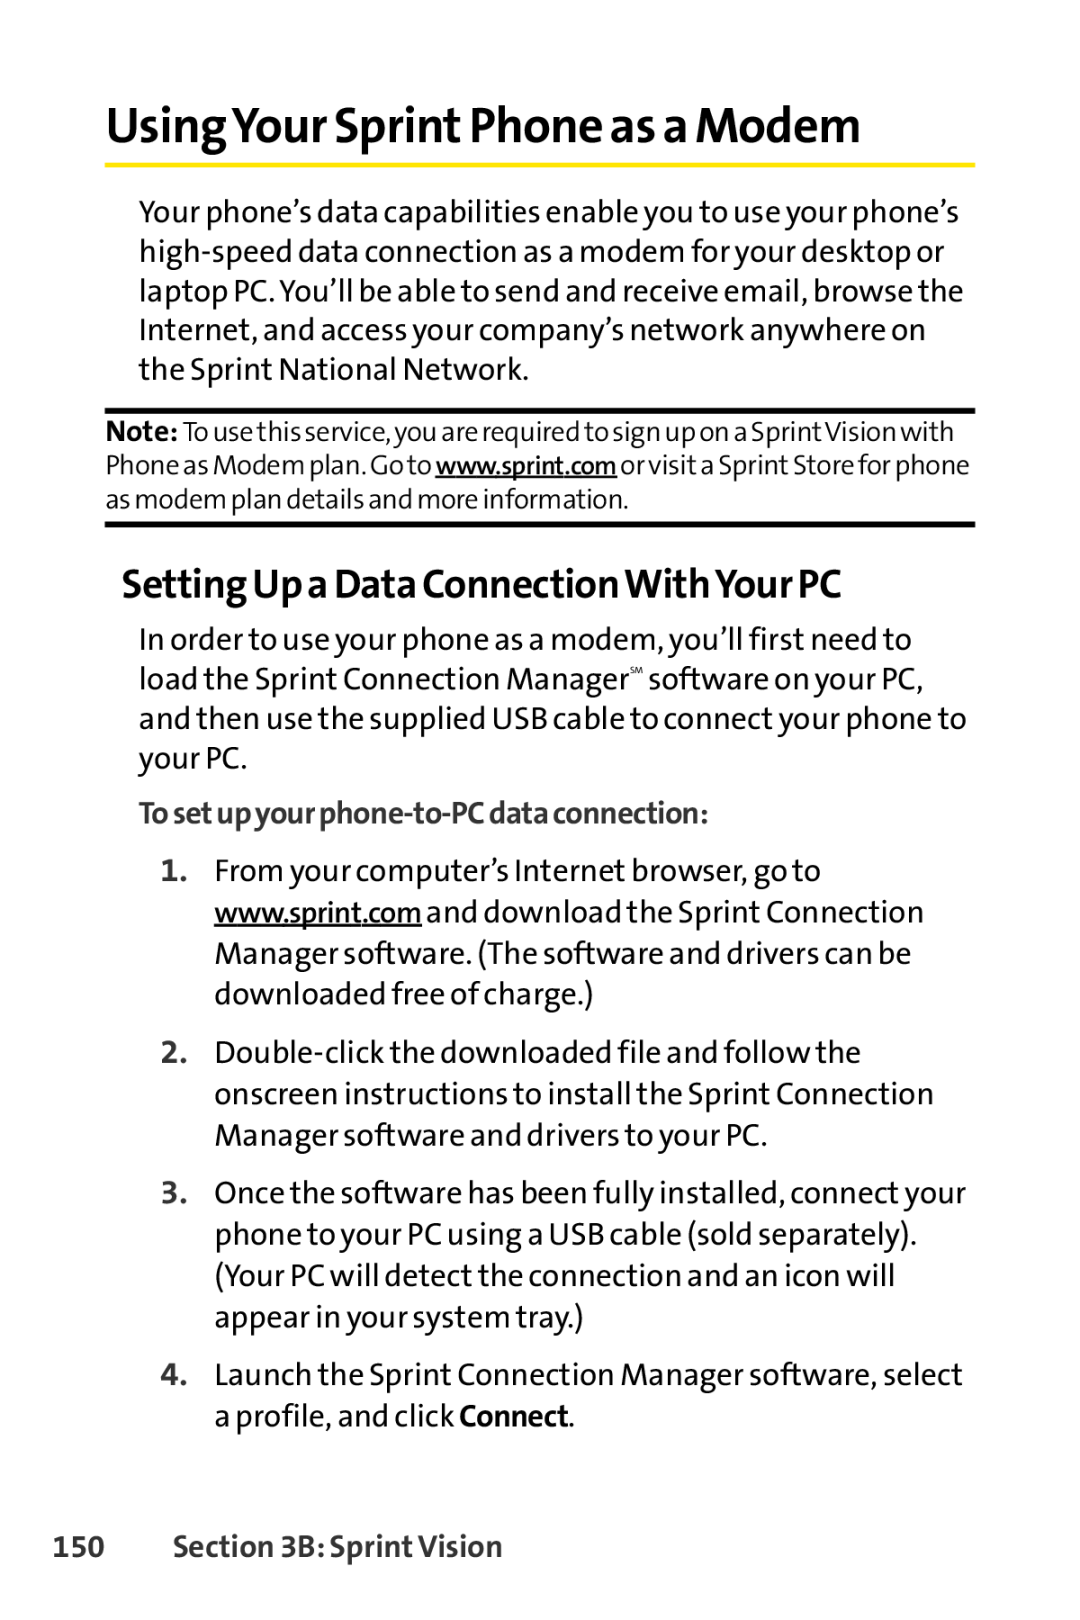 Sprint Nextel LX160 manual UsingYour SprintPhone as a Modem, Setting Up a Data ConnectionWithYour PC, B Sprint Vision 